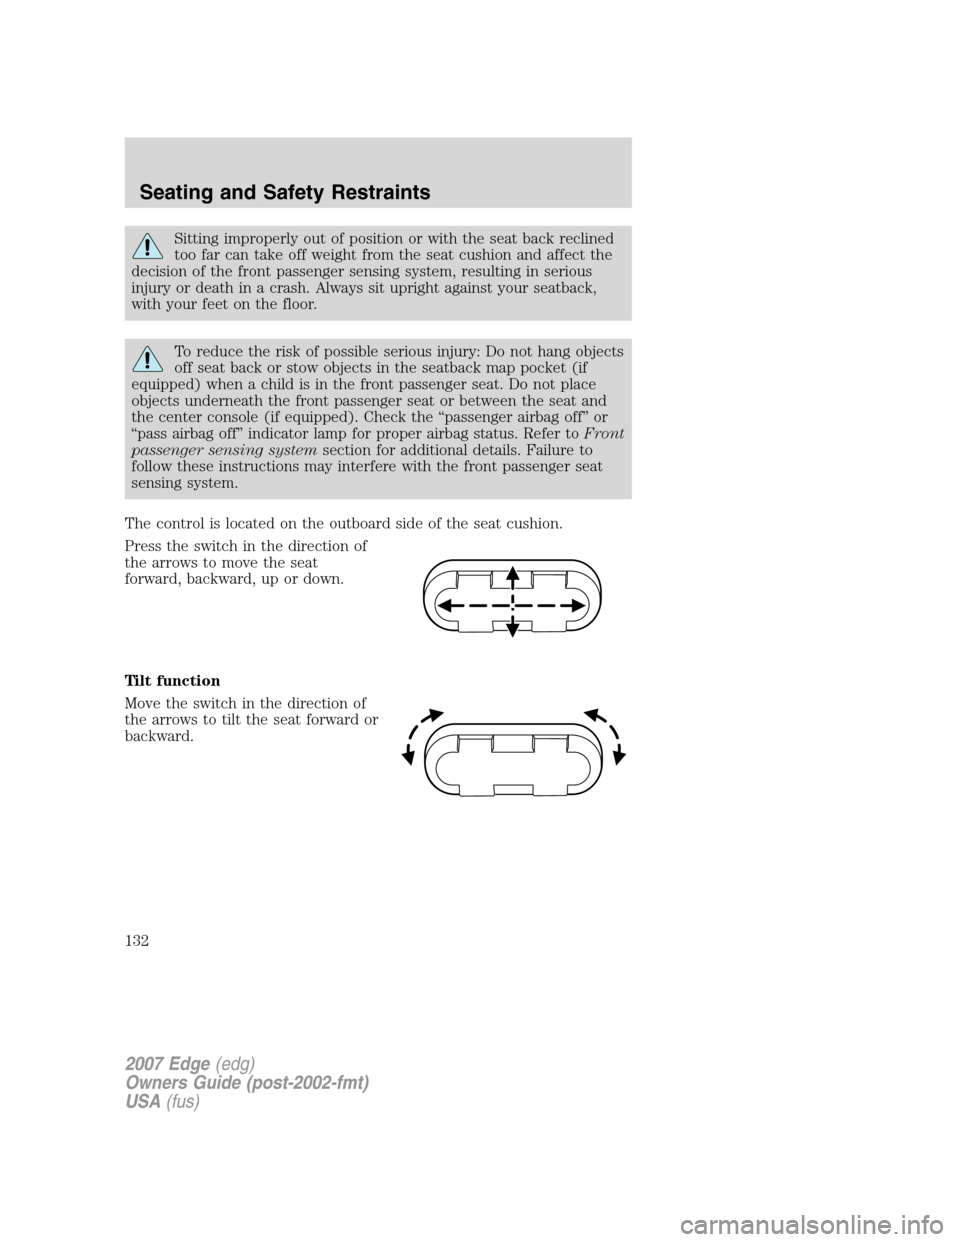 FORD EDGE 2007 1.G Owners Manual Sitting improperly out of position or with the seat back reclined
too far can take off weight from the seat cushion and affect the
decision of the front passenger sensing system, resulting in serious
